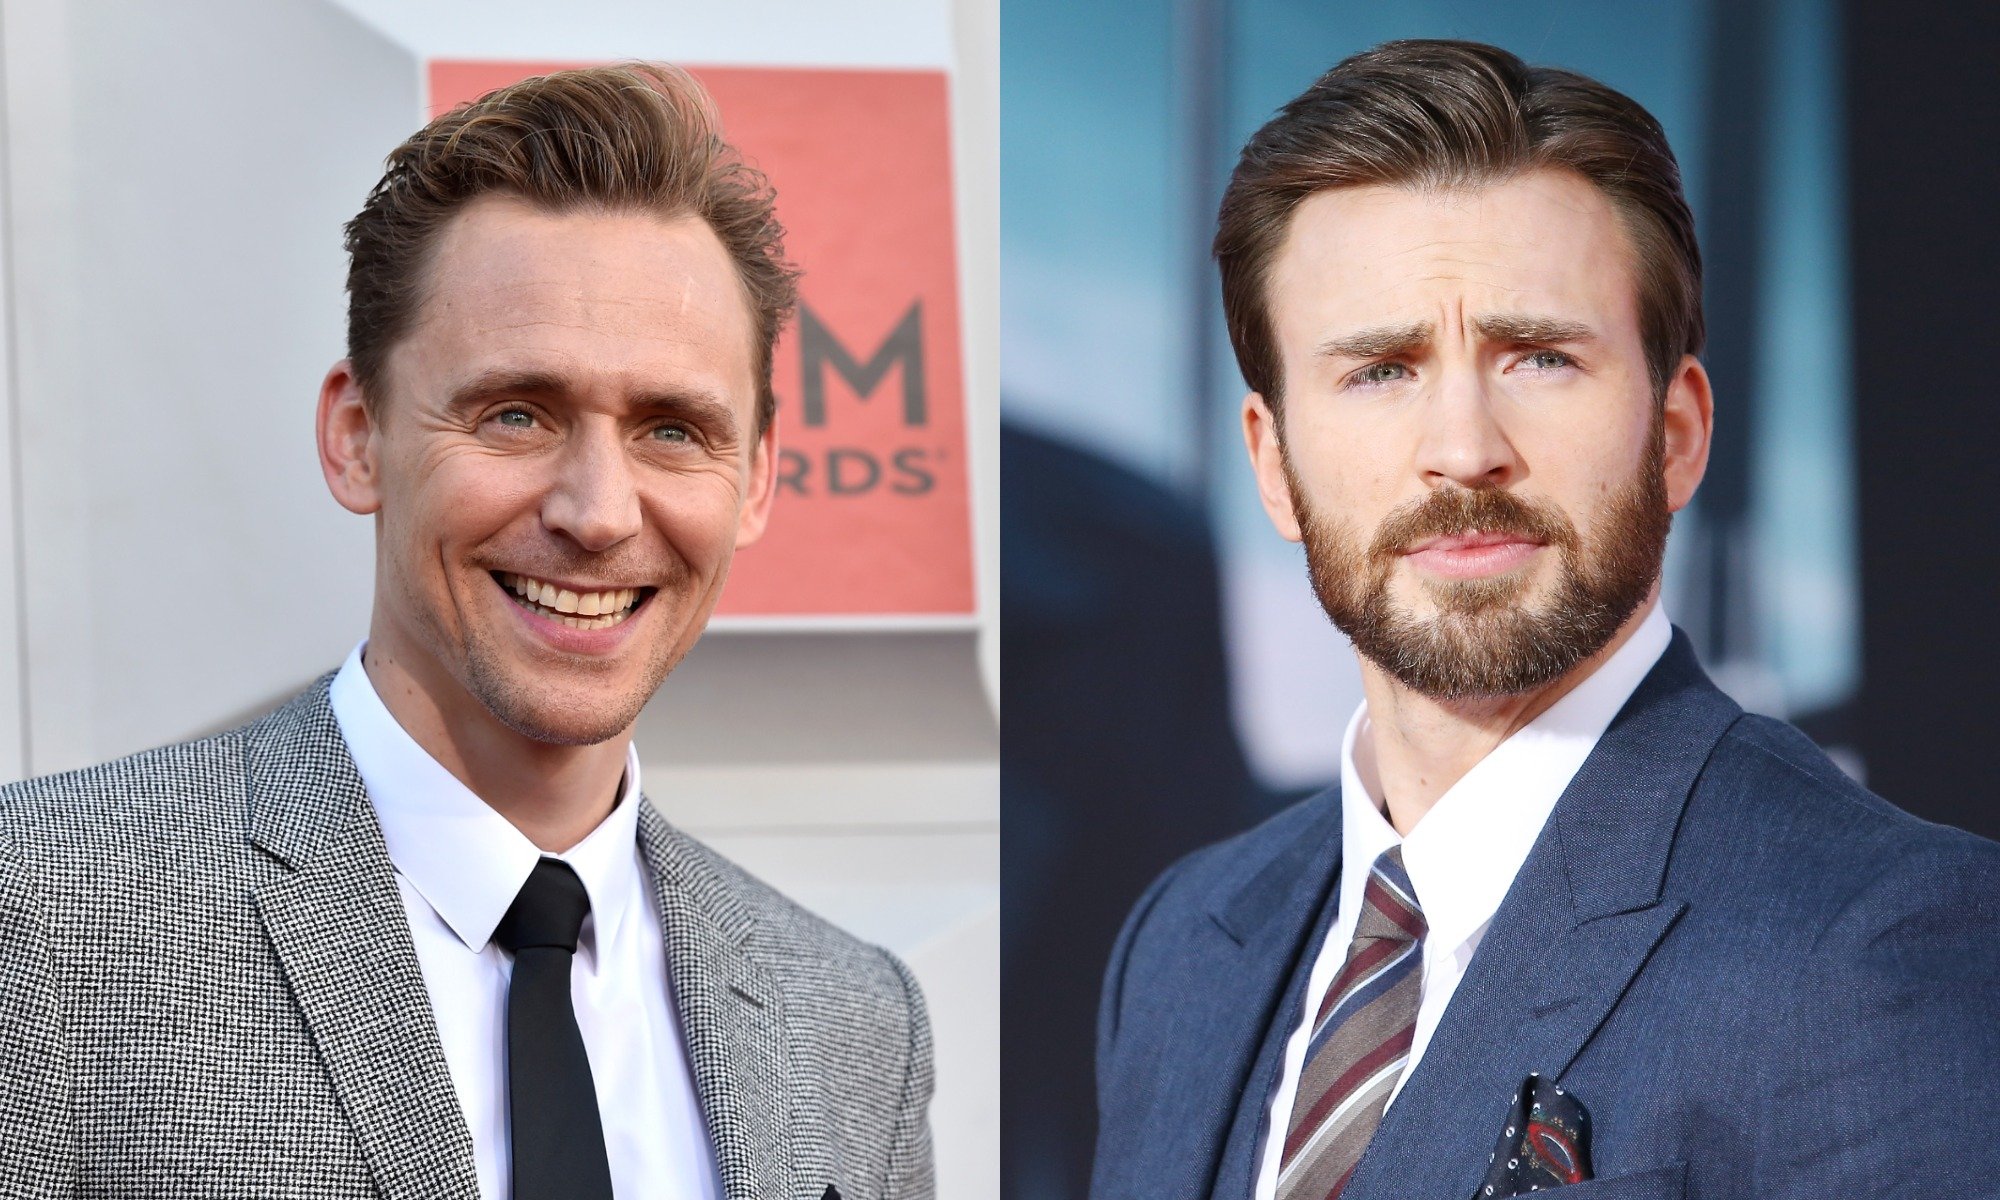 (L-R): Tom Hiddleston wearing a black and white suit and Chris Evans wearing a blue suit